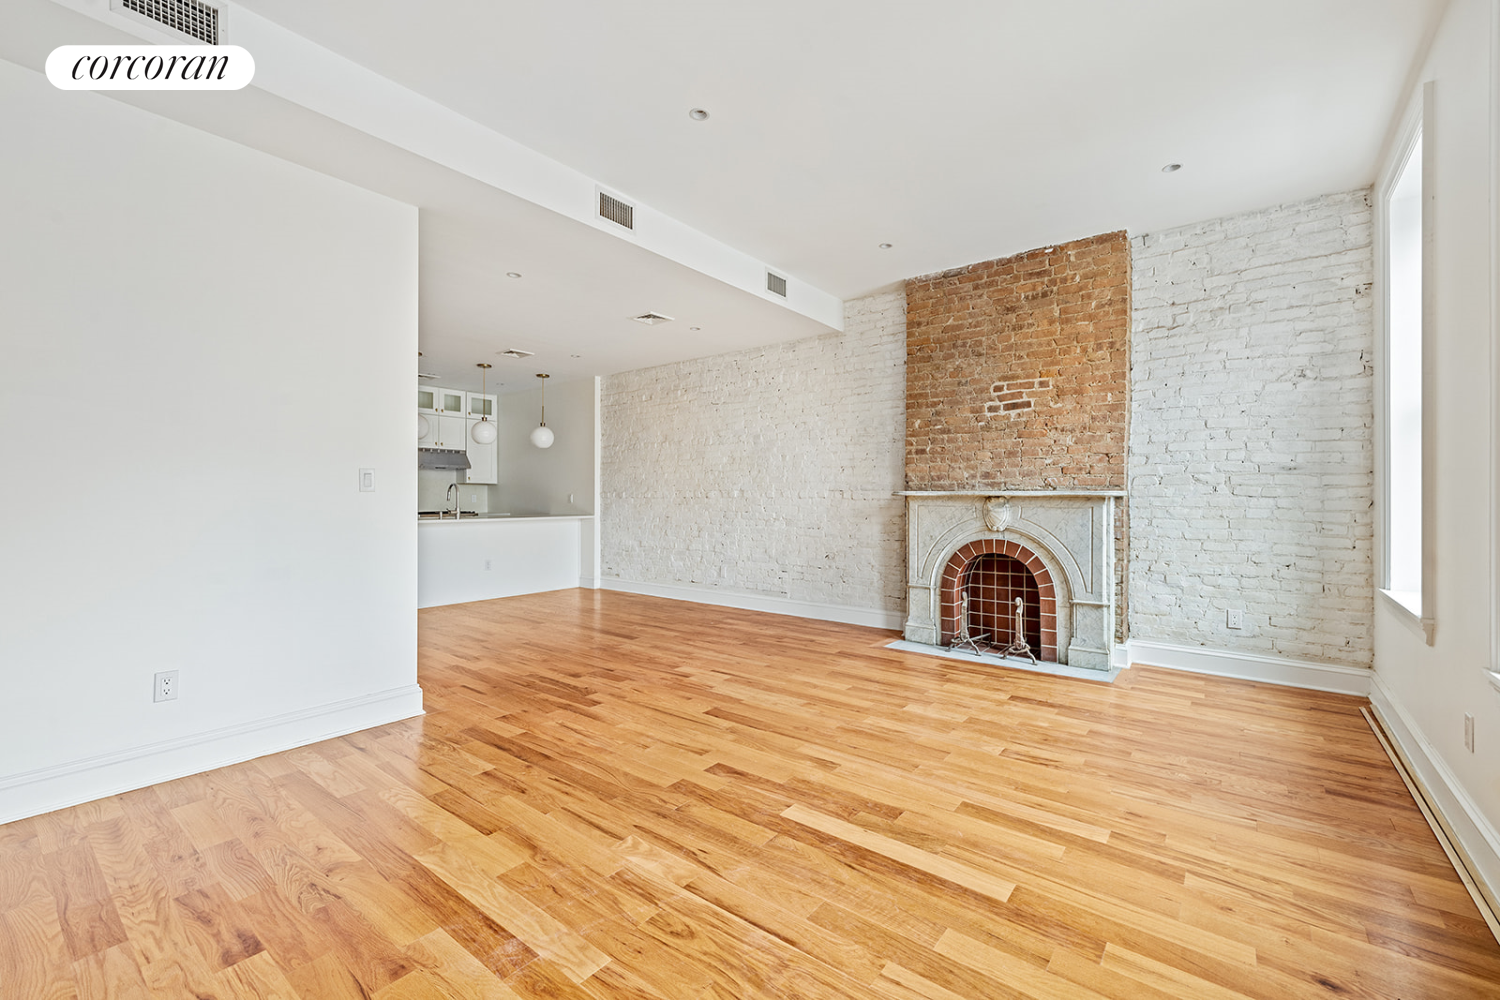 174 Court Street 2, Cobble Hill, Brooklyn, New York - 2 Bedrooms  
2 Bathrooms  
5 Rooms - 